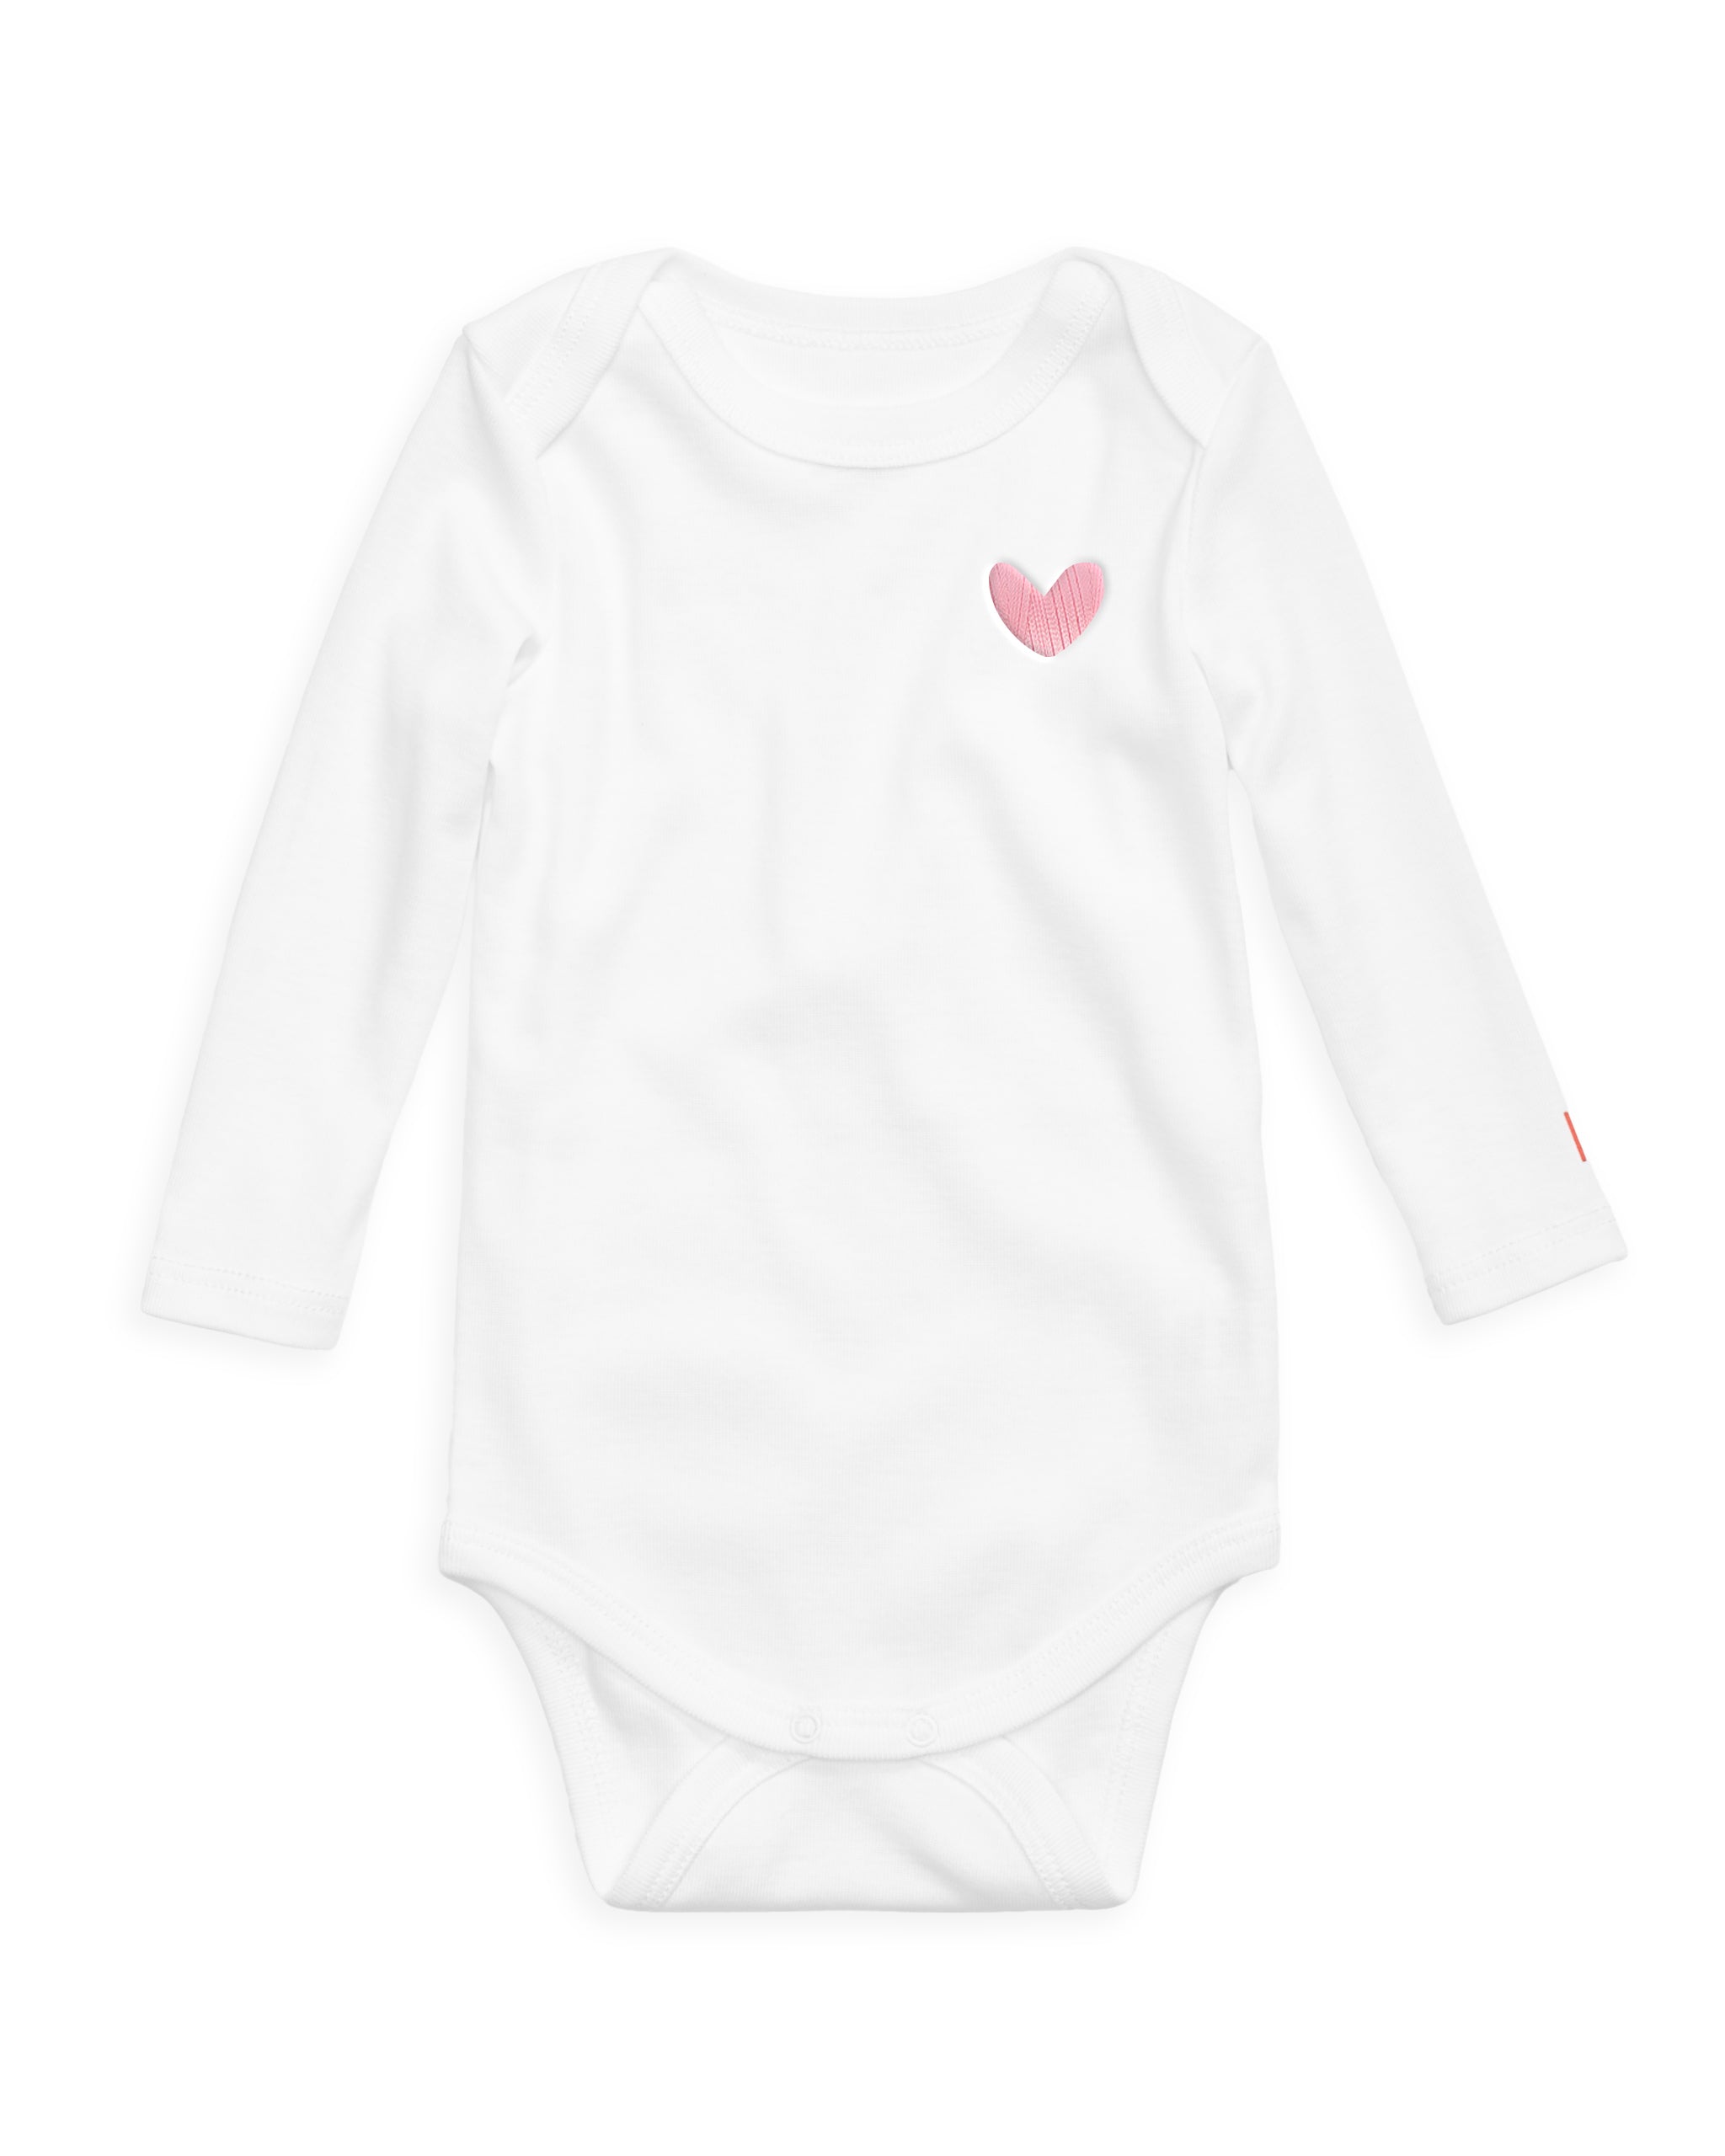 The Organic Embroidered Long Sleeve Onesie [White with Pink Heart]